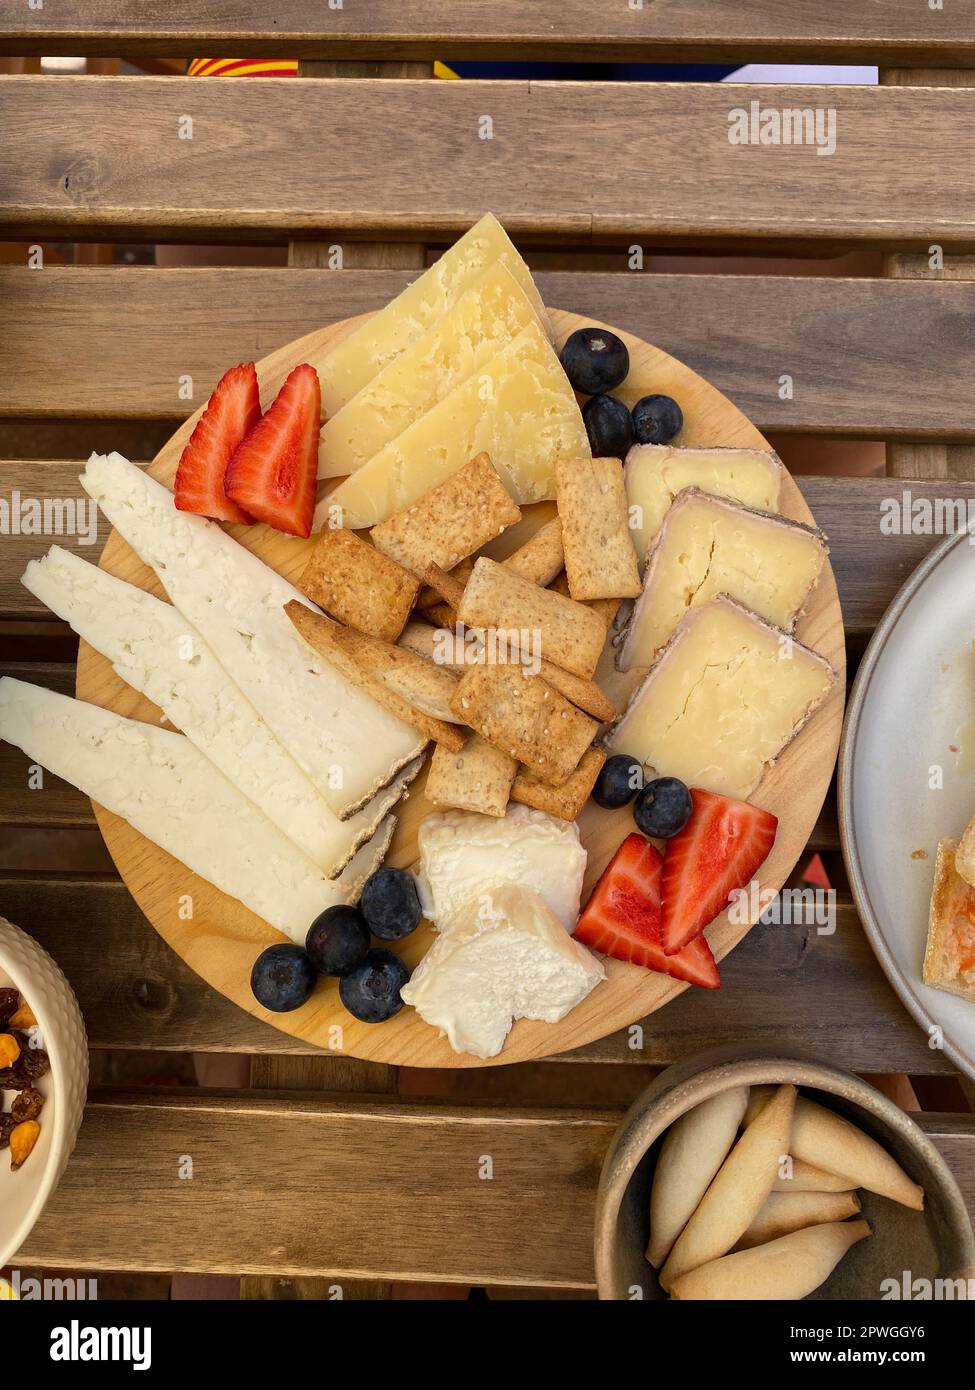 Different tasty cheese slices prepared with some strawberries and fruits on a wooden table Stock Photo